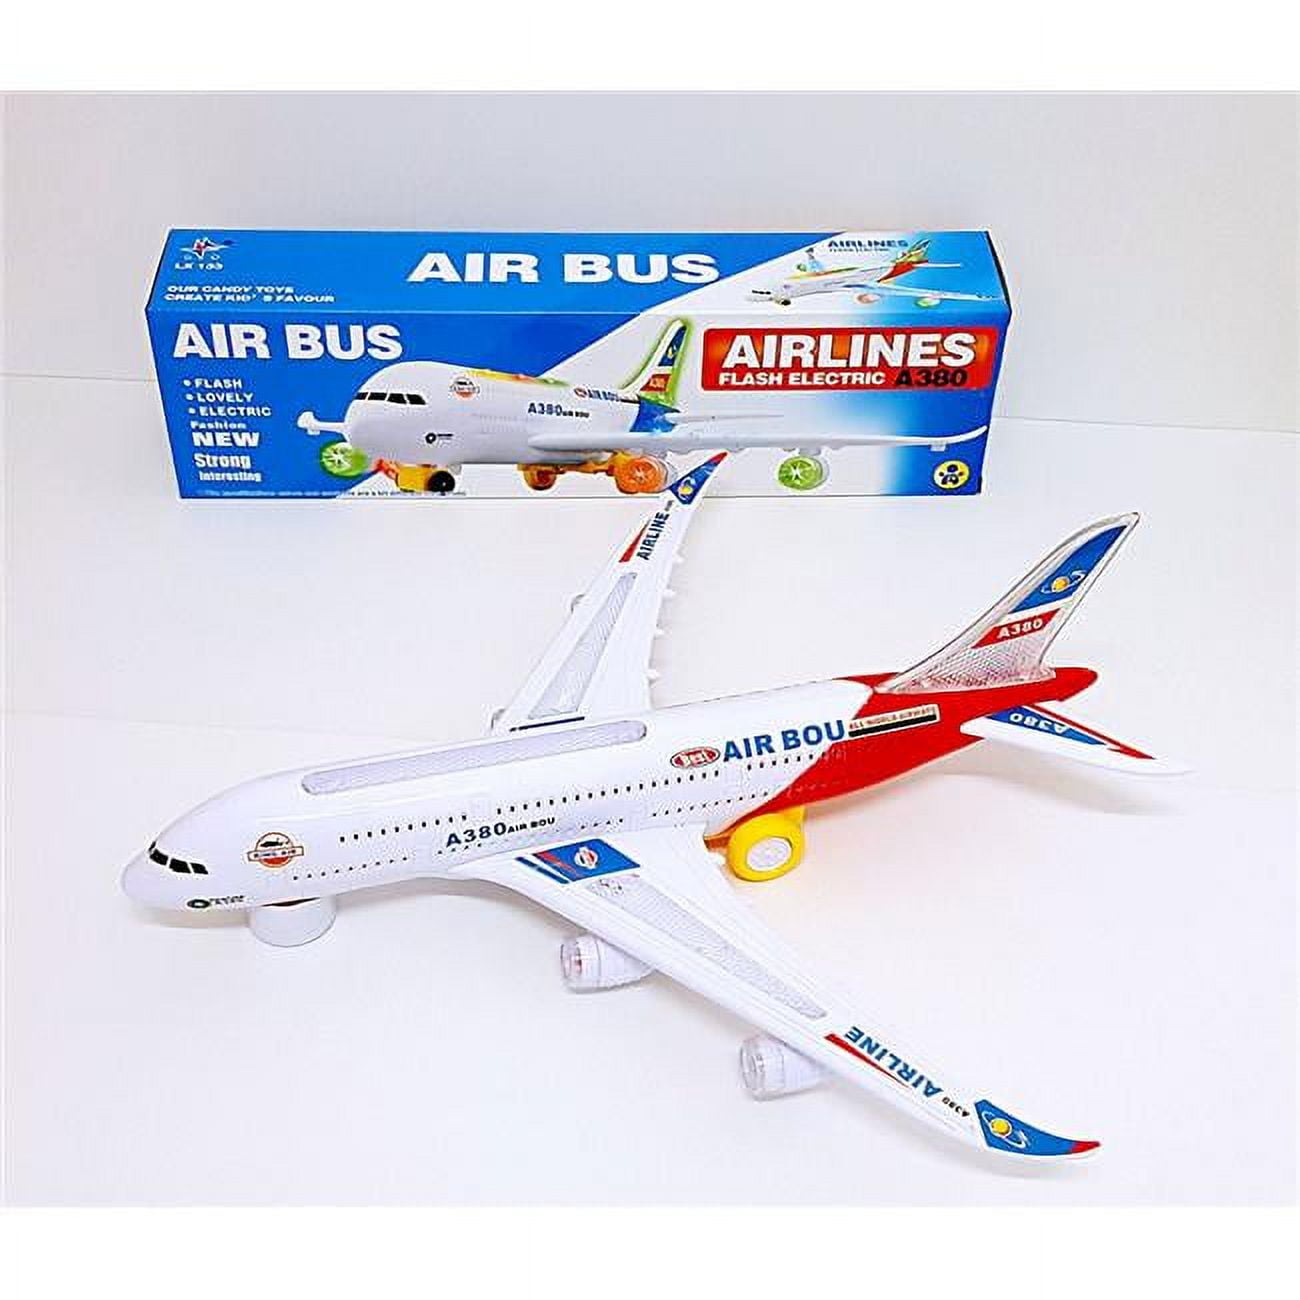 Ap133 Red Toy Airplane With Flashing Lights & Sound, Red